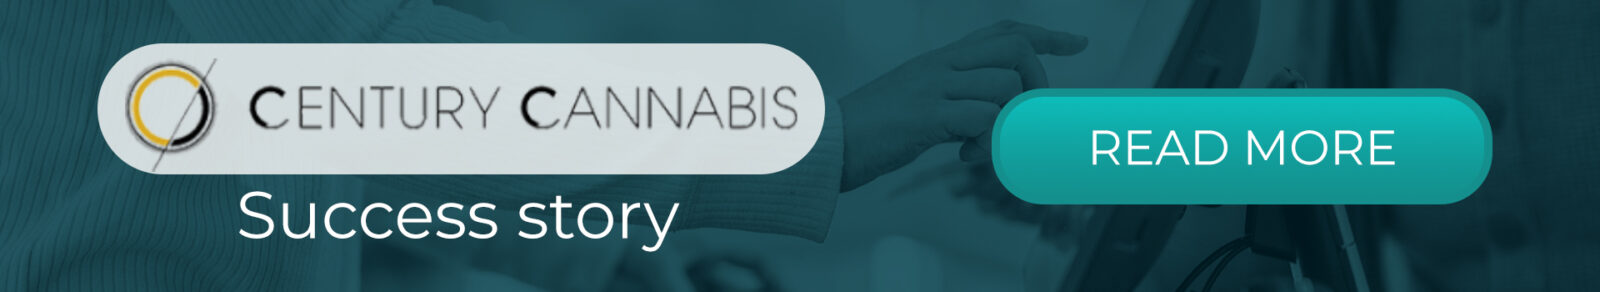 centery-cannabis-success-story-read-more-banner